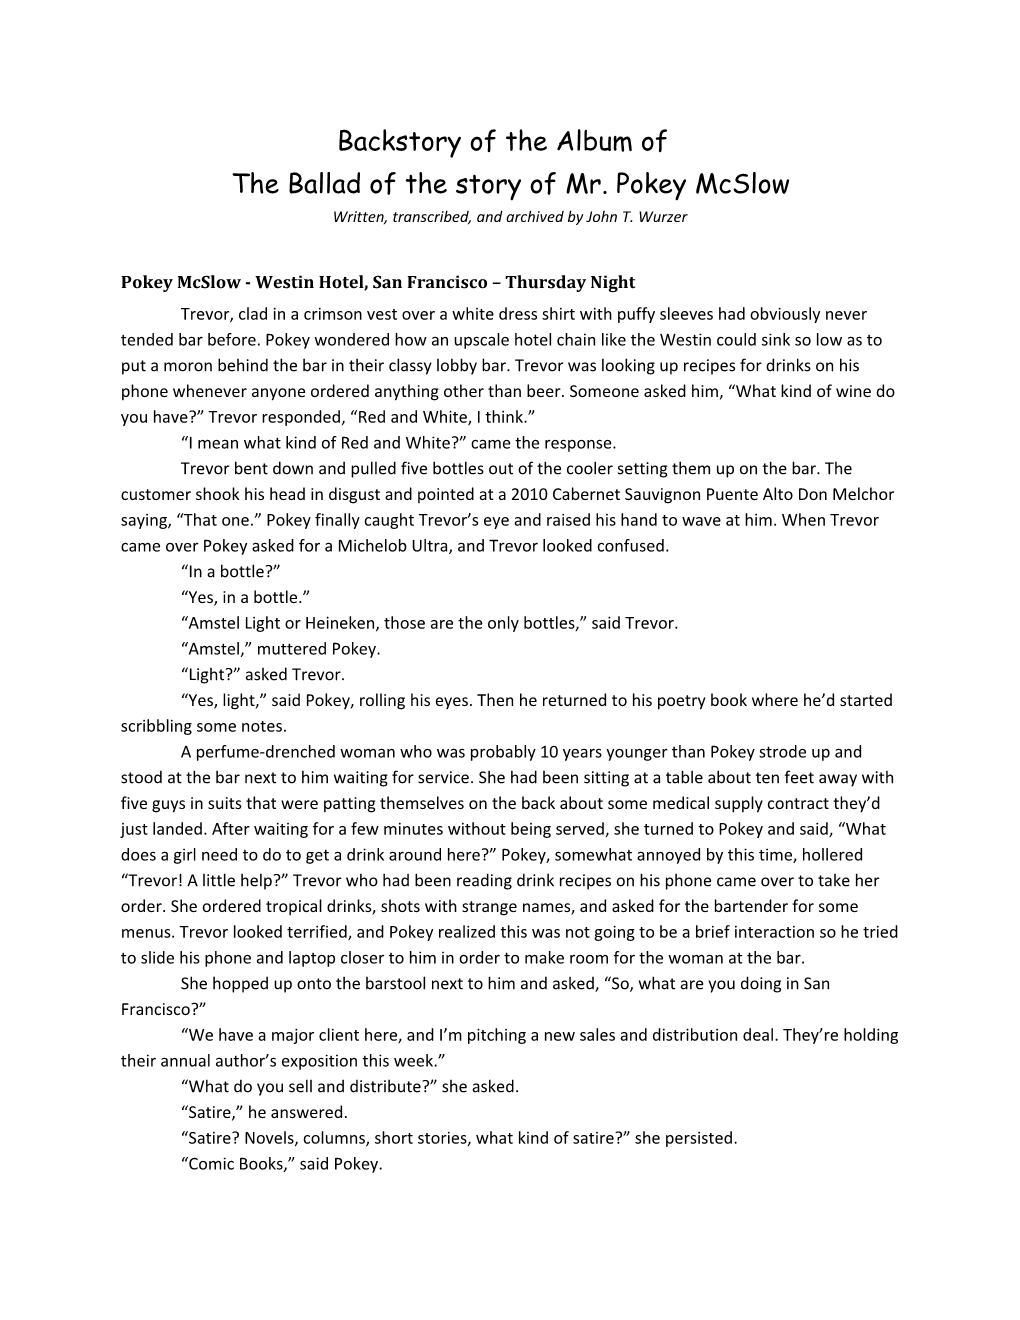 The Ballad of the Story of Mr. Pokey Mcslow